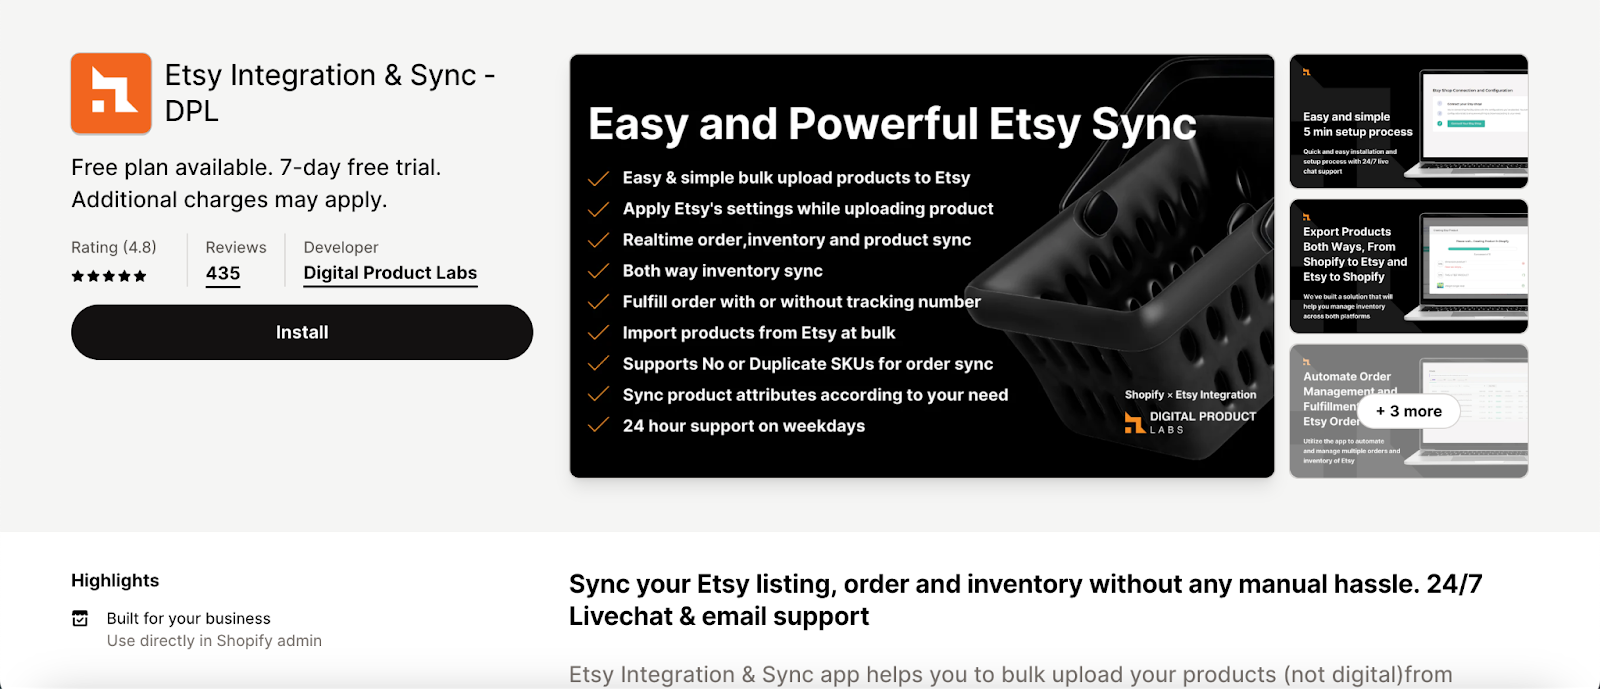 Etsy Integration & Sync by DPL